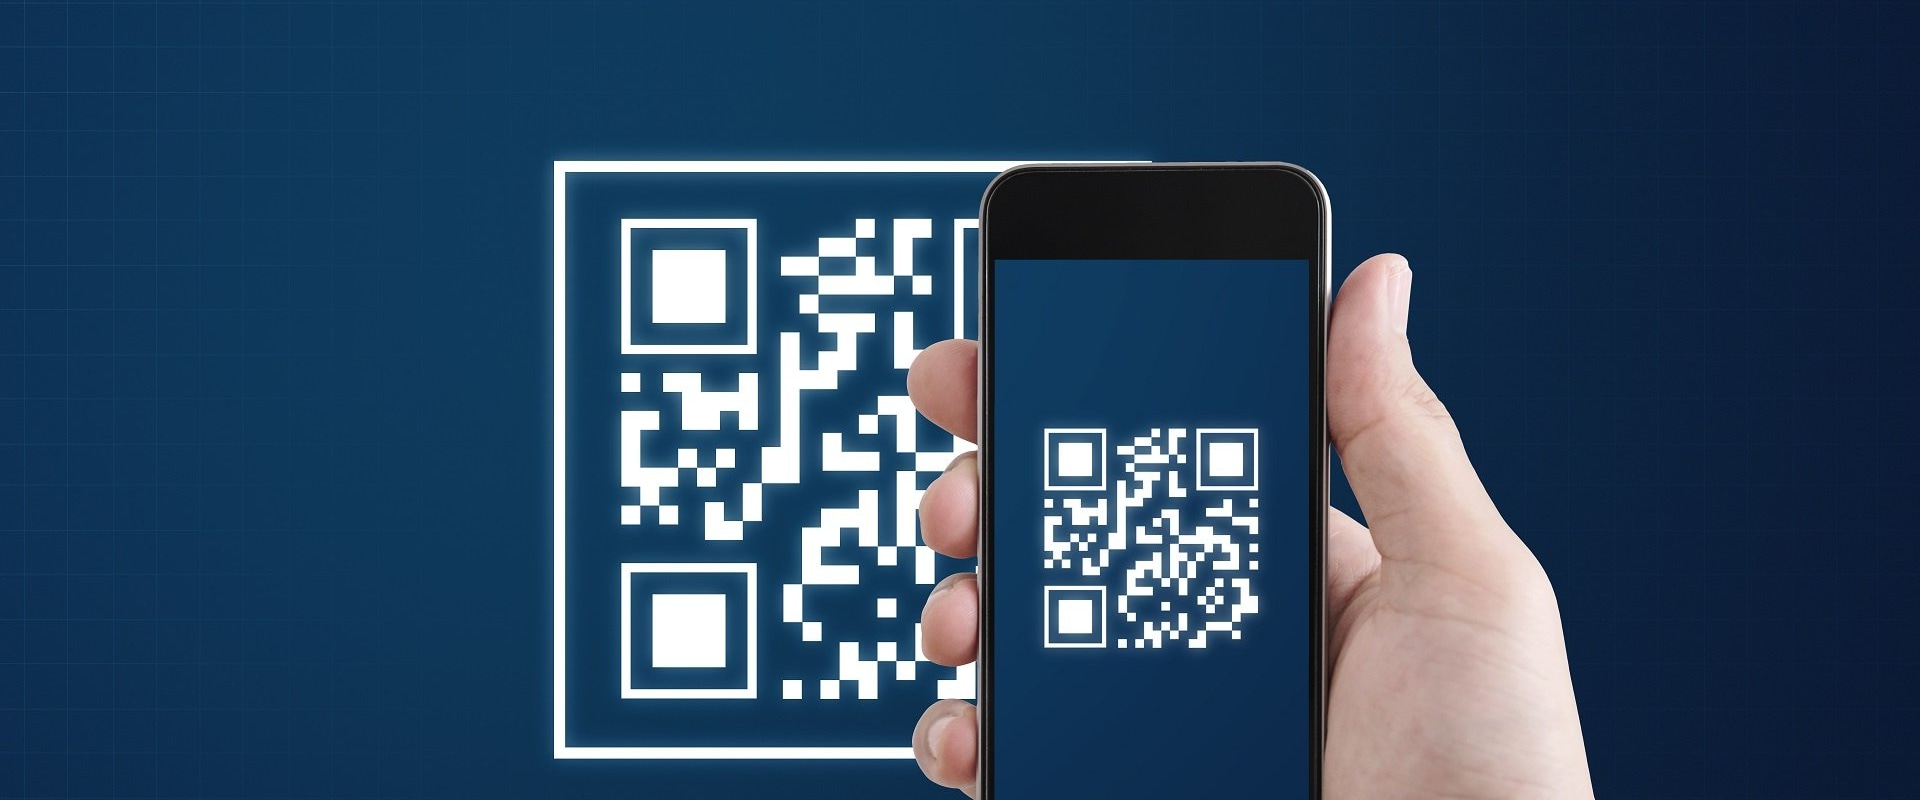 How to Use an iOS QR Code Scanner